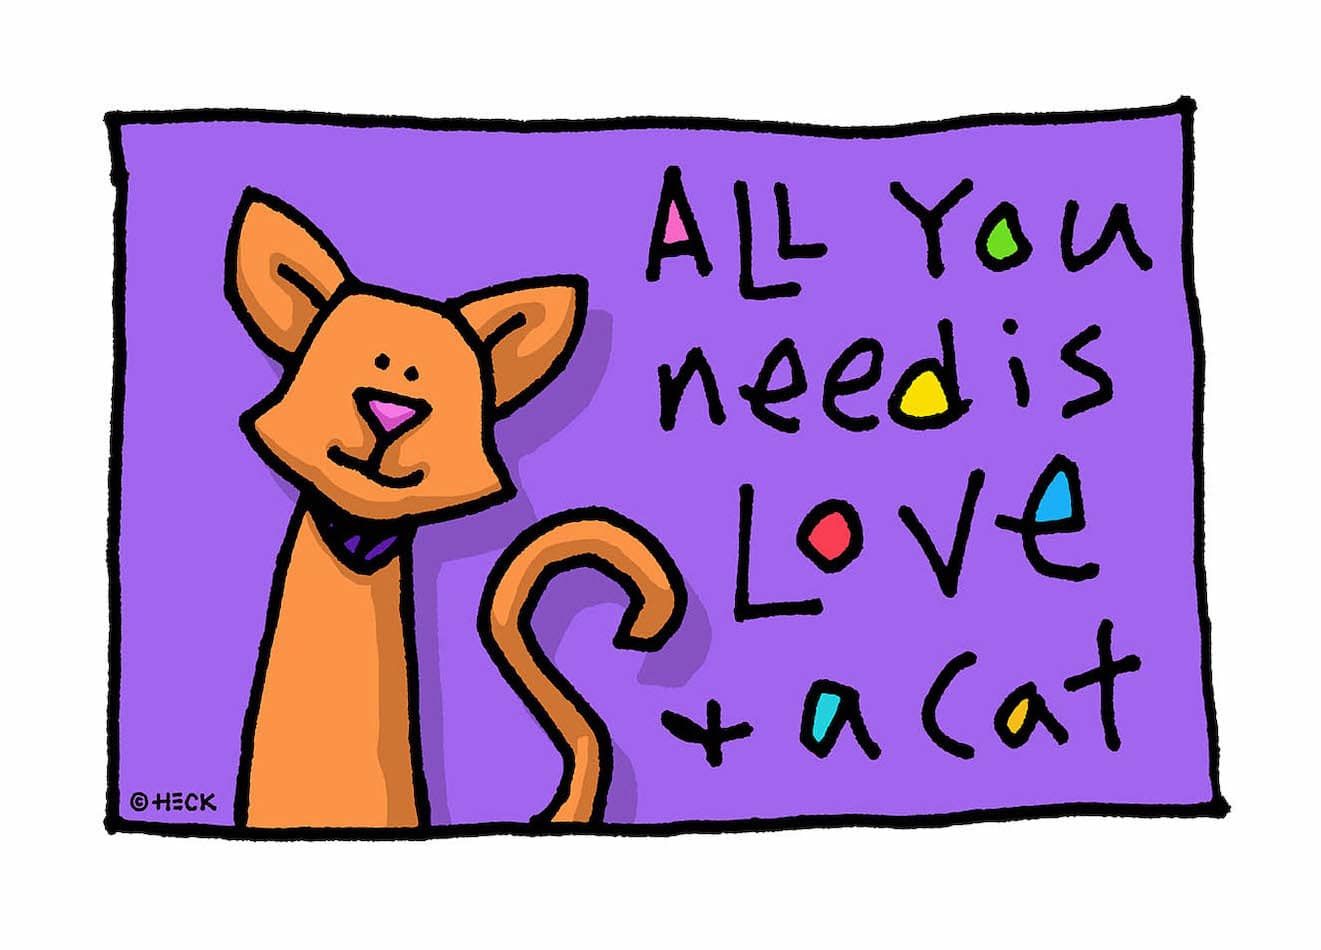 Ed-Heck-All-you-need-is-love-and-a-cat.jpg